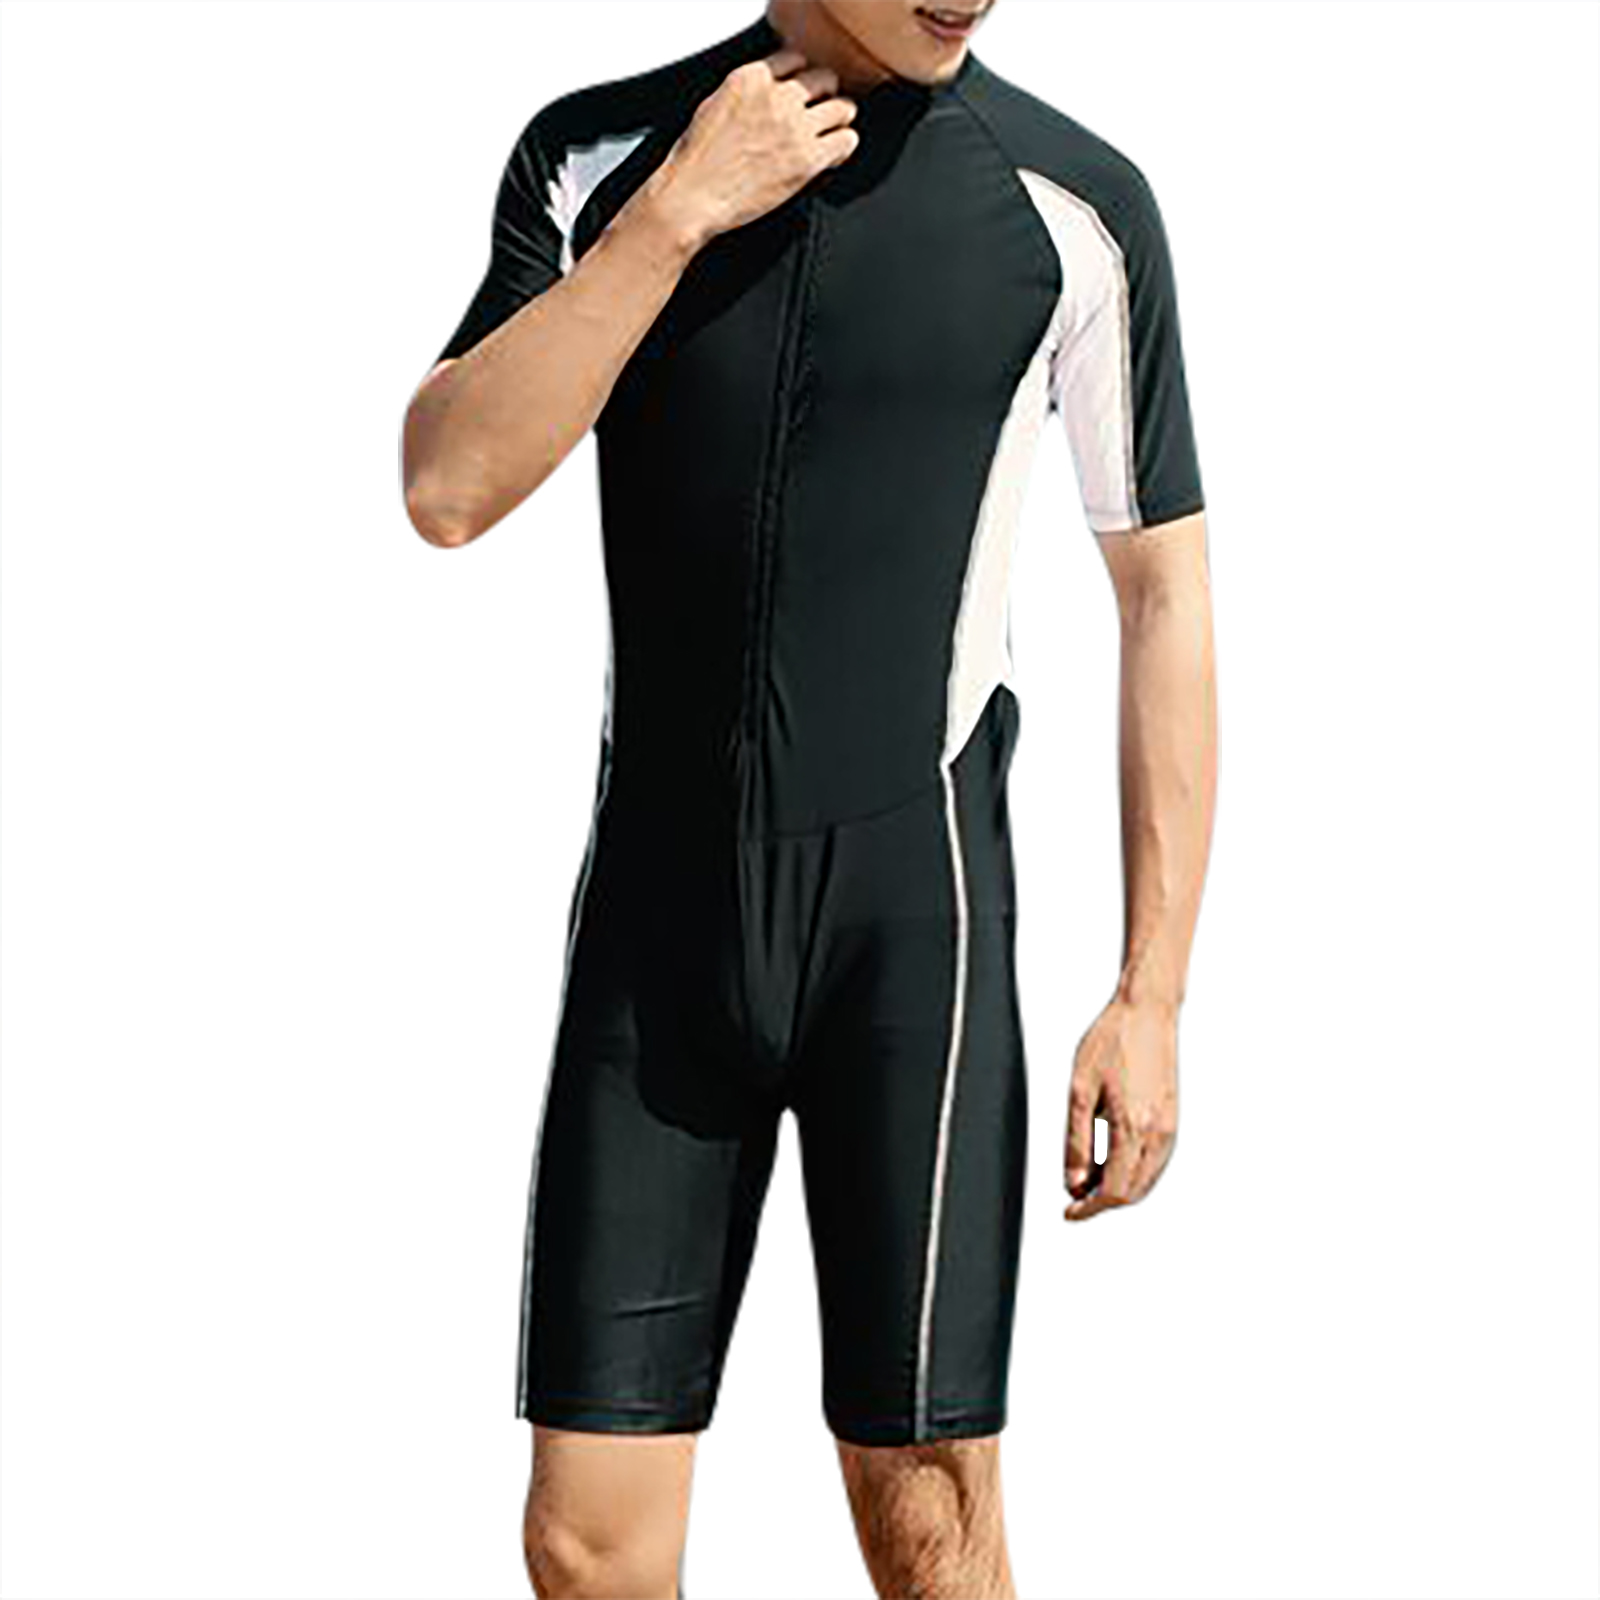 Men Sun Protective Swimsuit Short Sleeves Upf50+ Front Zipper Sunscreen Diving Suit For Swimming Surfing black M